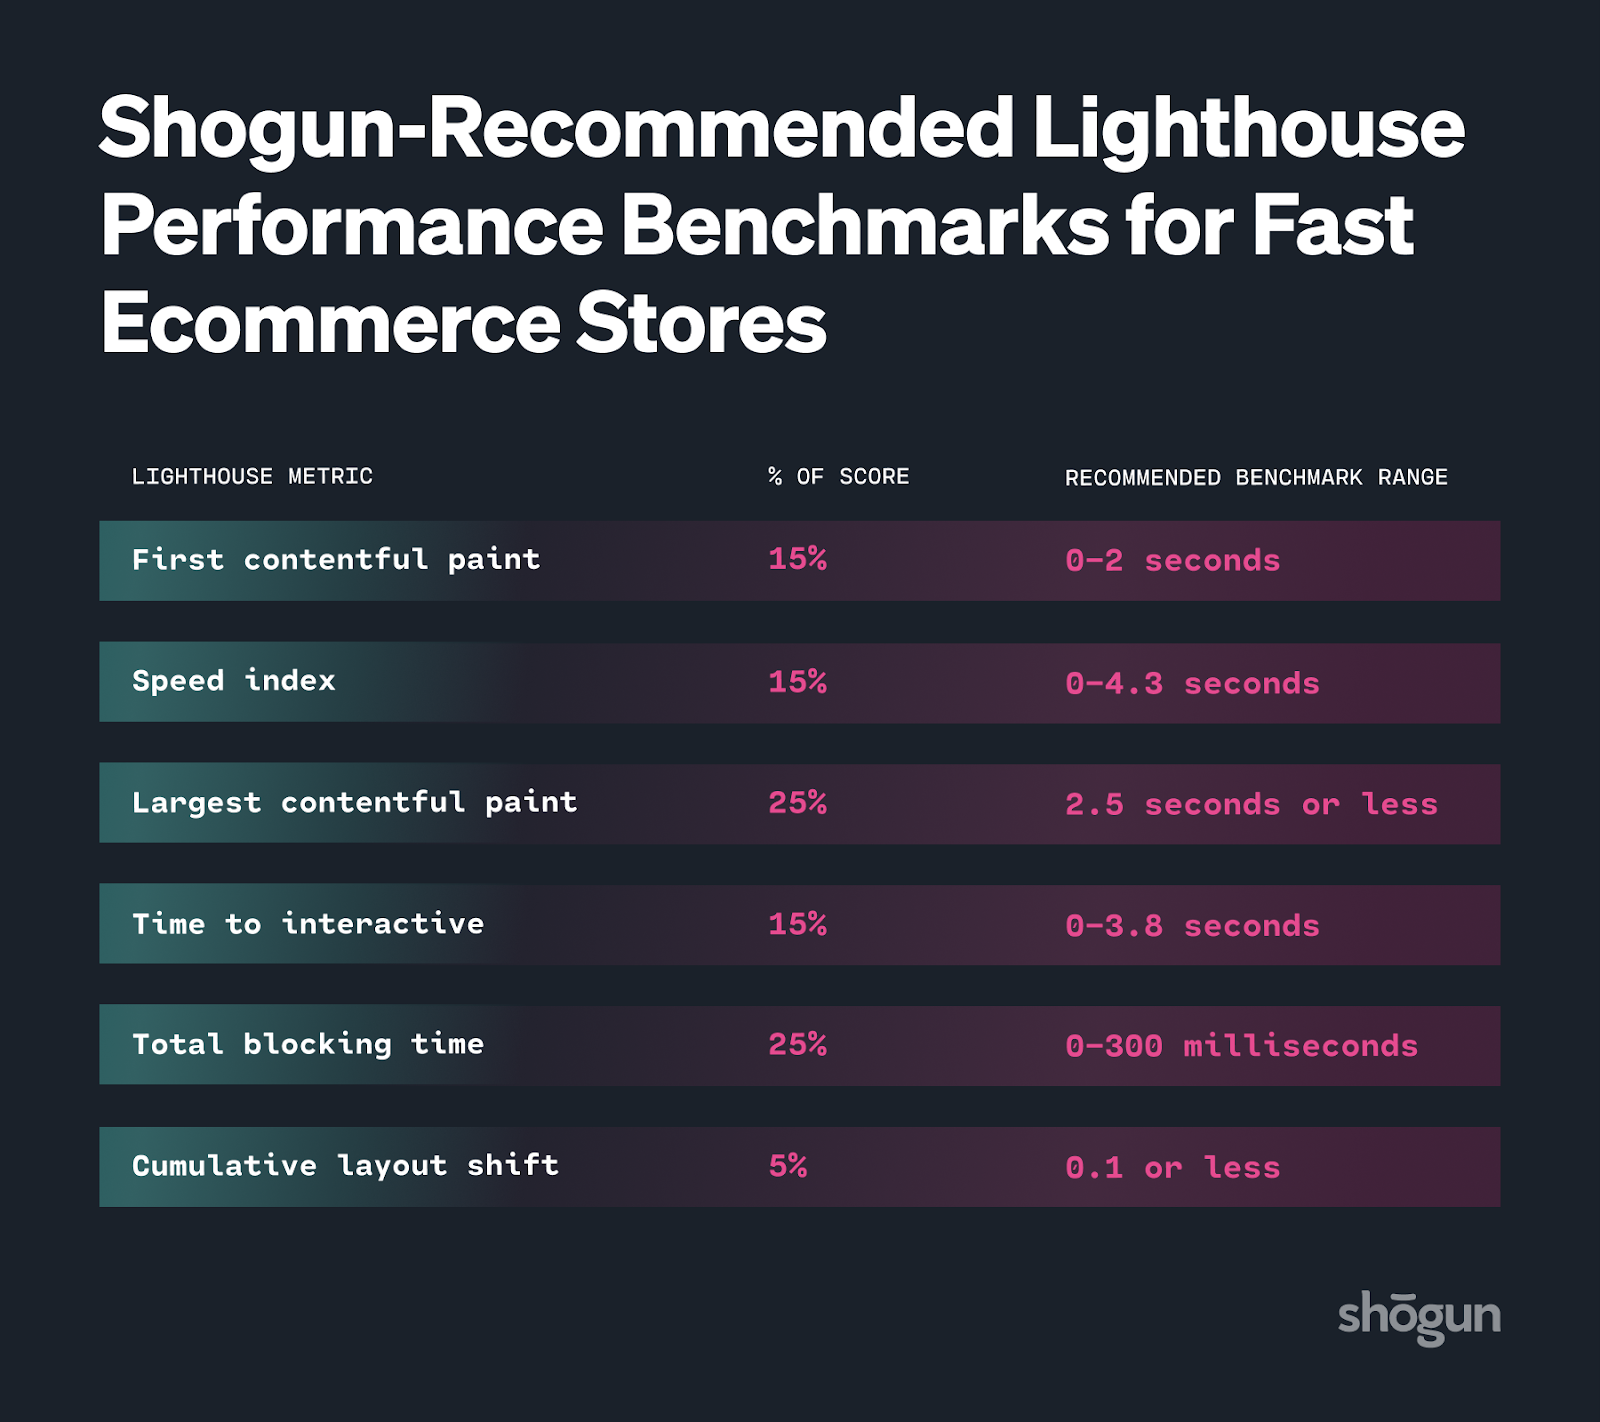 Shogun-recommended Lighthouse performance benchmarks for fast ecommerce stores